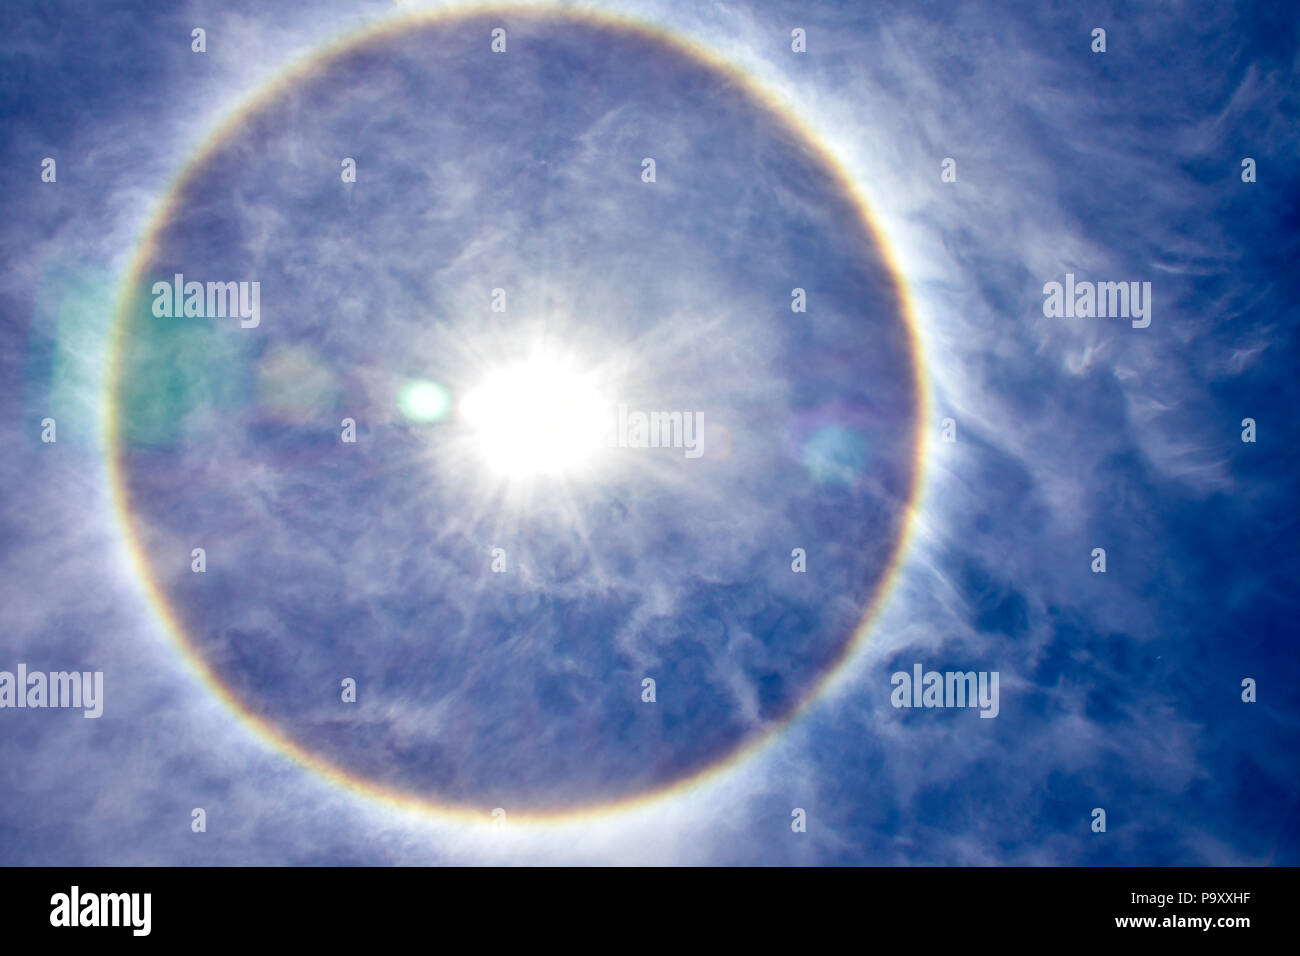 What makes a halo around the sun or moon? | Space | EarthSky | Sky and  clouds, Atmospheric phenomenon, Sun dogs